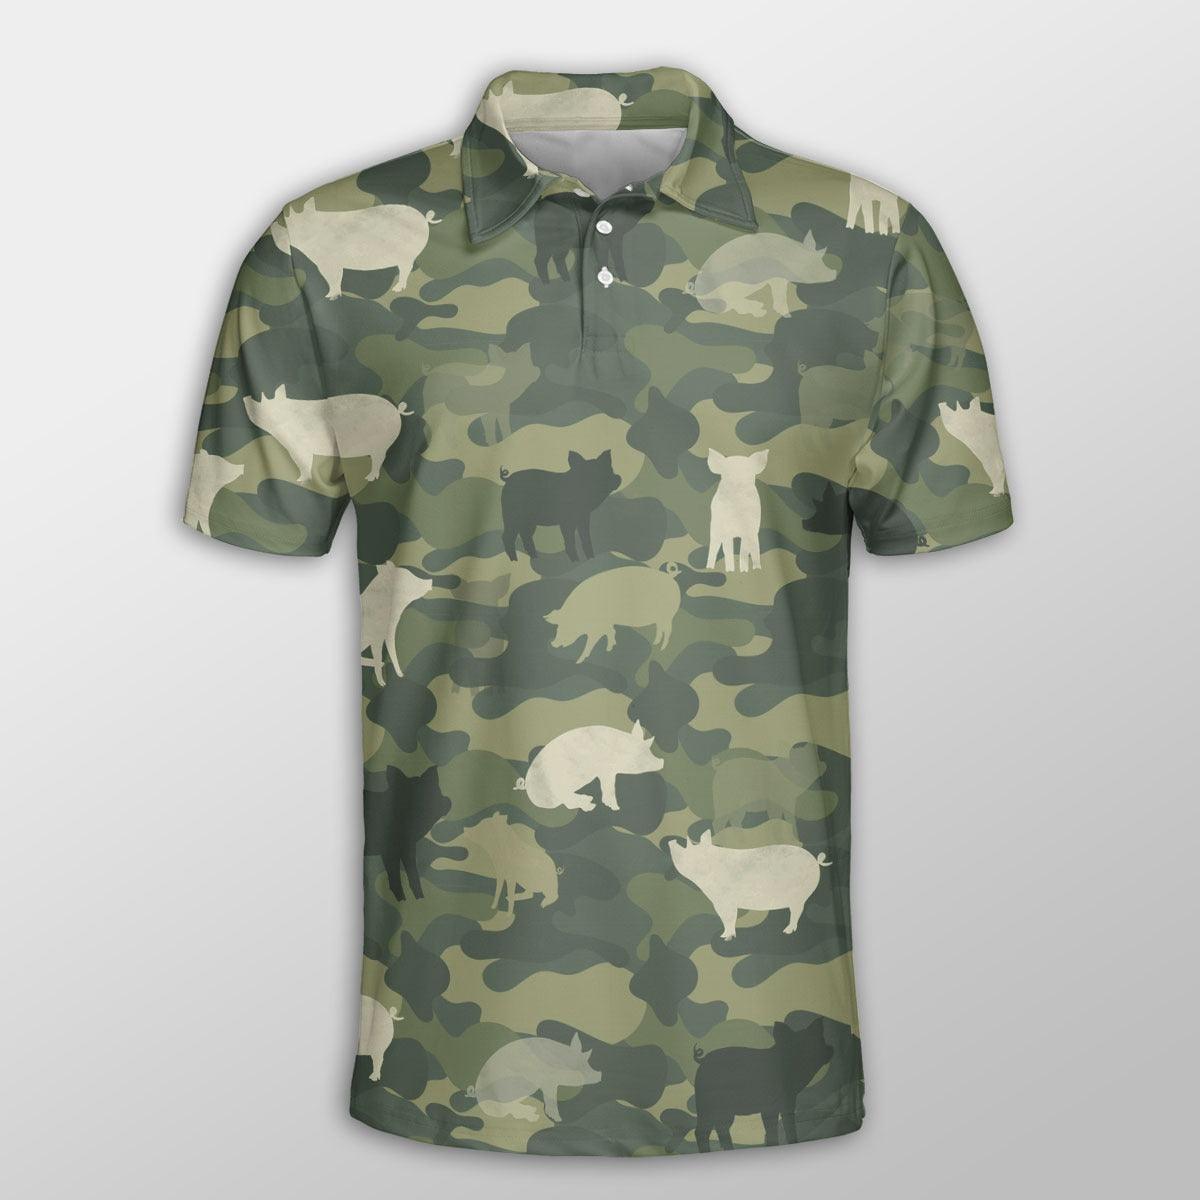 Pig Men Polo Shirt For Summer - Pig Camo Pattern Button Shirt For Men - Perfect Gift For Pig Lovers, Cattle Lovers - Amzanimalsgift